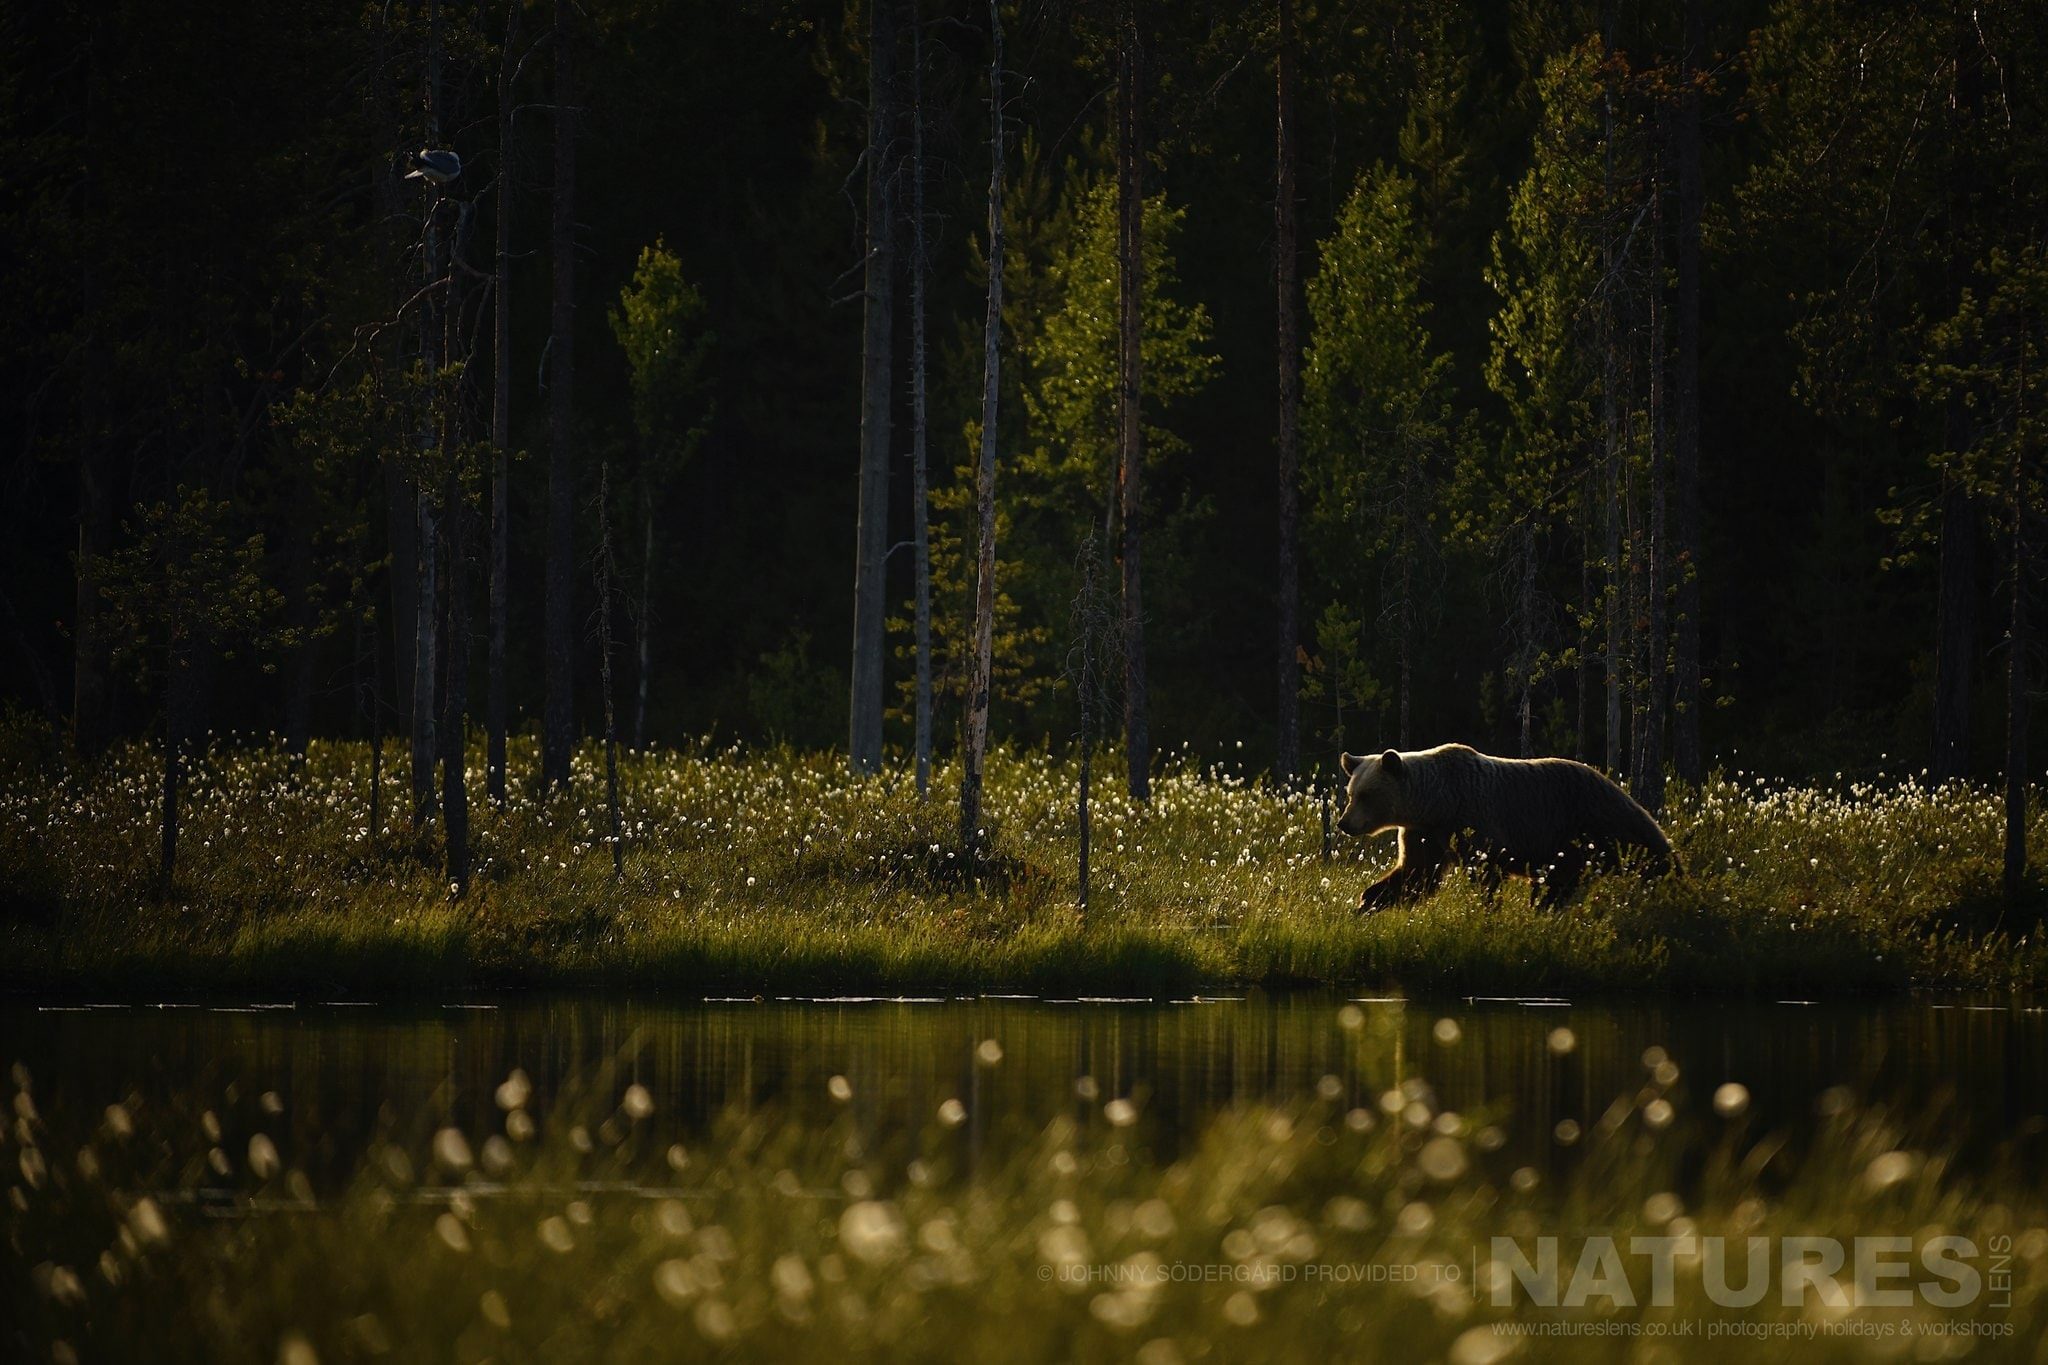 One Of The Large Bears Walks Alongside The Lake Photographed By Johnny Södergård During The Natureslens Wild Brown Bears Of Finland Photography Holiday